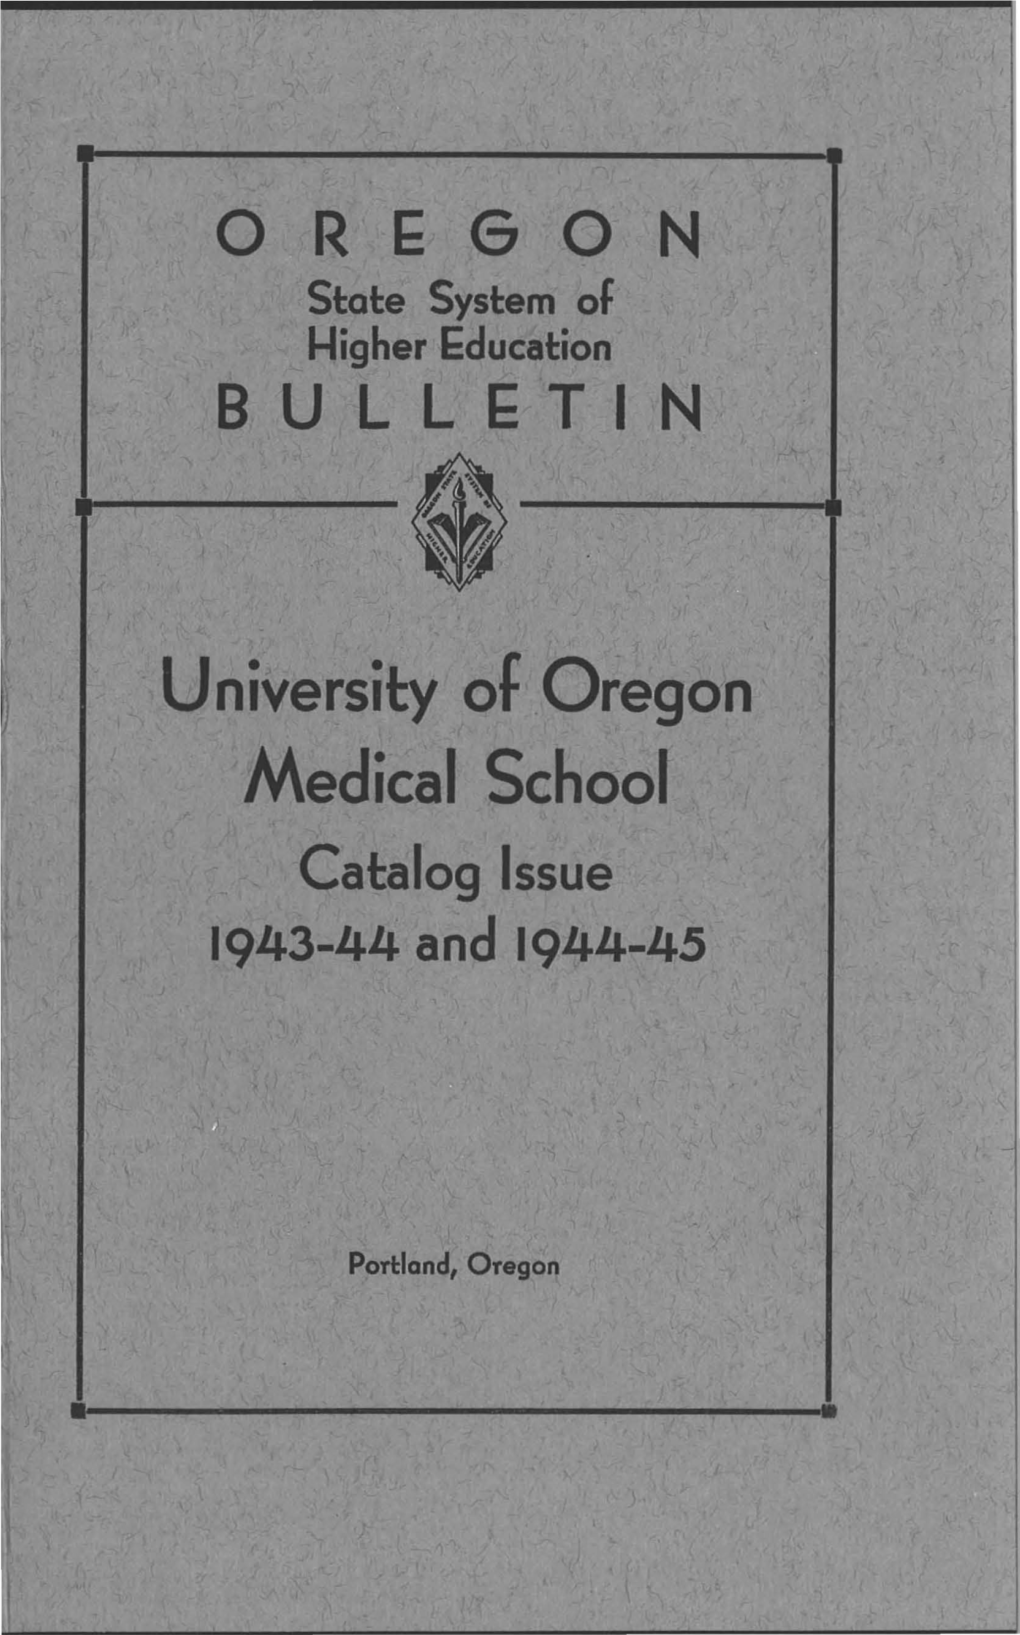 Medical Schoof Catalog Issue 1943-44 and 1944-45